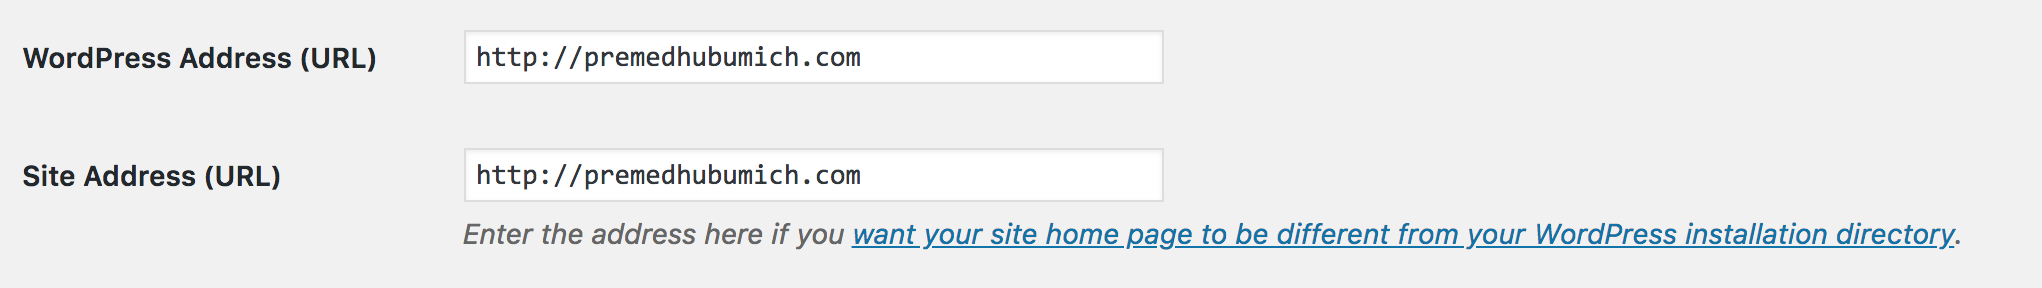 Website and Site Address settings